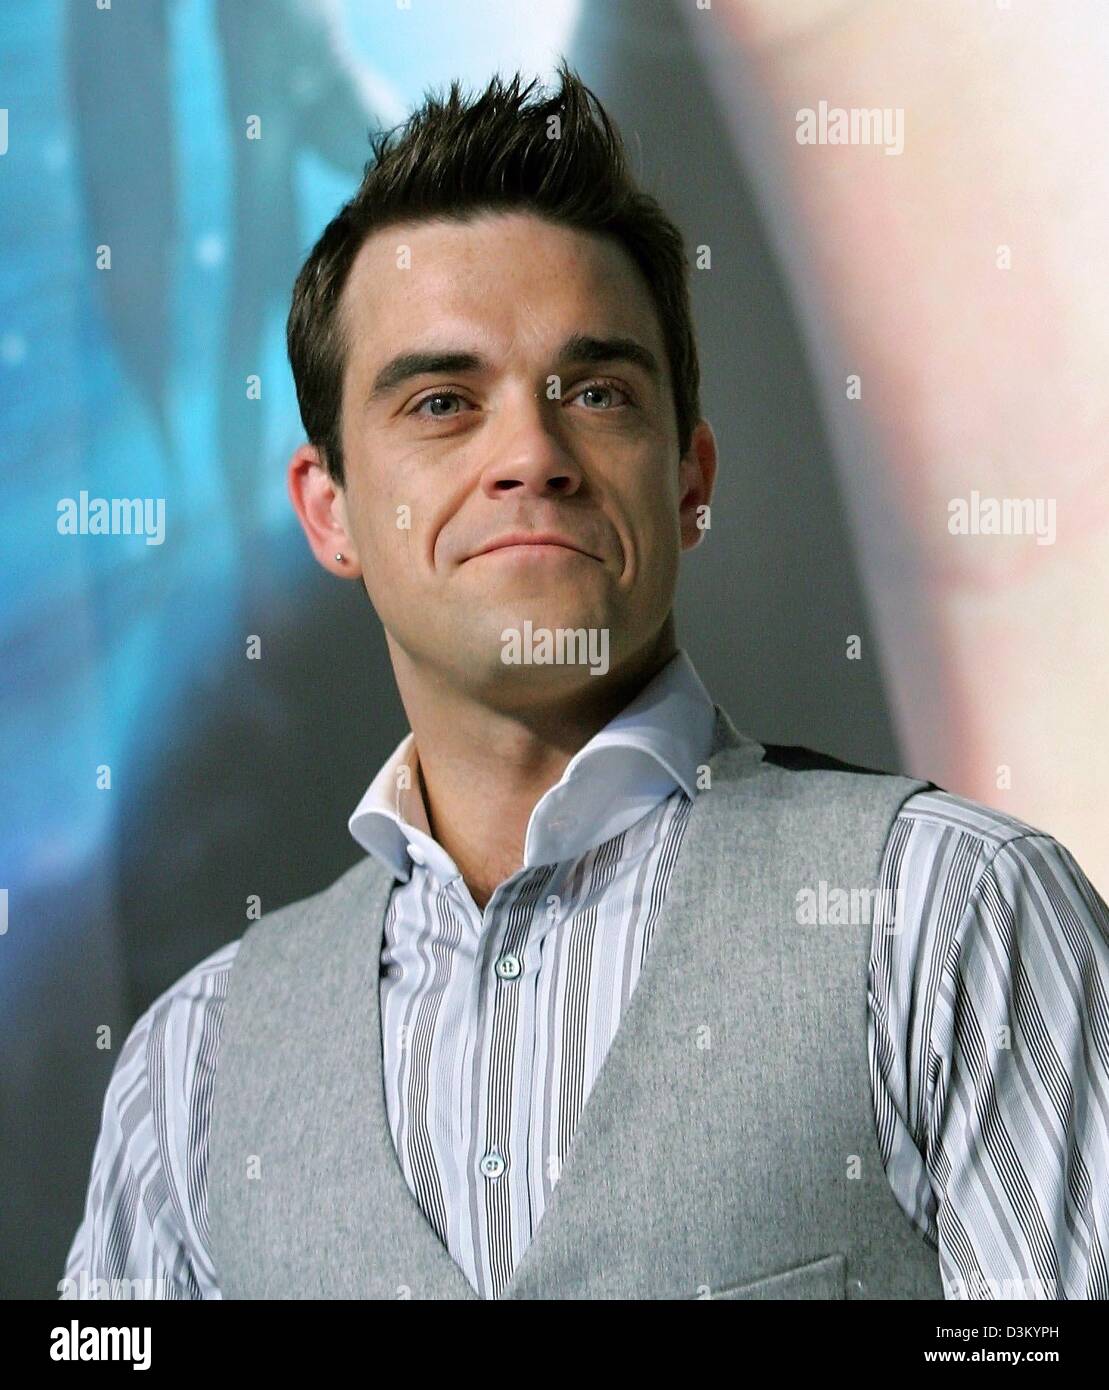 (dpa) - British pop singer Robbie Williams poses at a photo shooting in Berlin, Germany, Friday 07 October 2005. The former member of boy band 'Take that' promoted his new album 'Intensive Care' during a press conference in the German capital. The singer will perform his new songs for the first time live on stage at the sold out Velodrom in Berlin, Sunday 09 October 2005. Photo: So Stock Photo